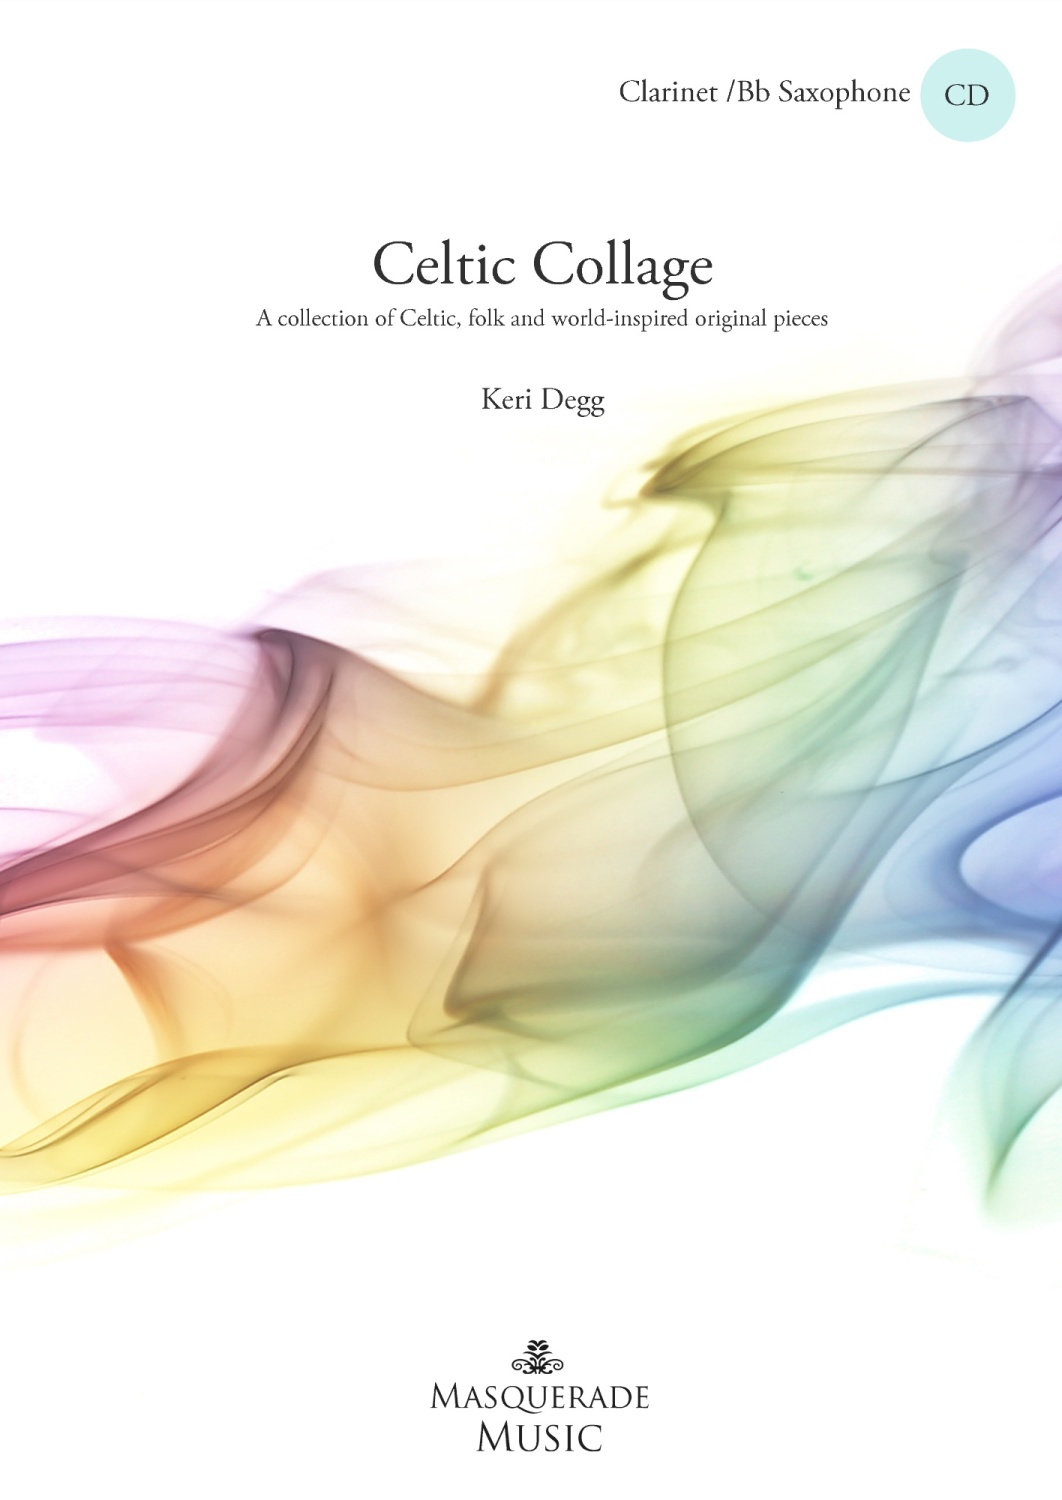 Celtic collage - Bb Saxophone/Clainet & Piano edition.